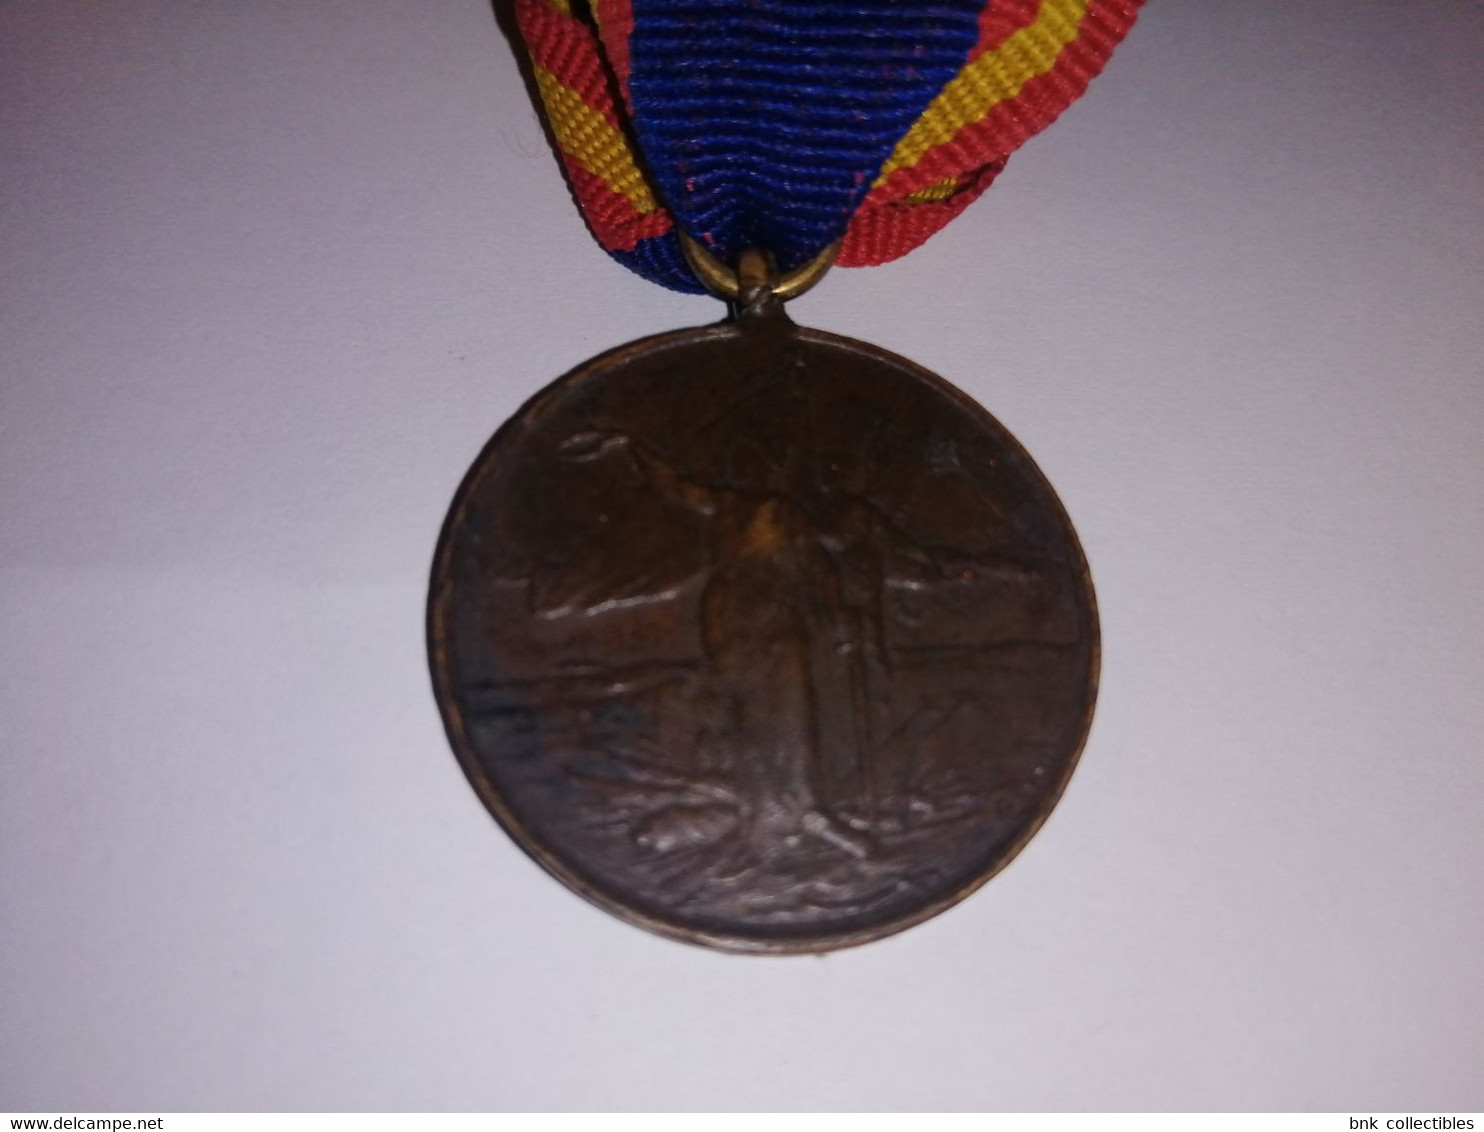 Romania Defenders Of Independence Medal 1877-1878 - Rare - Russland